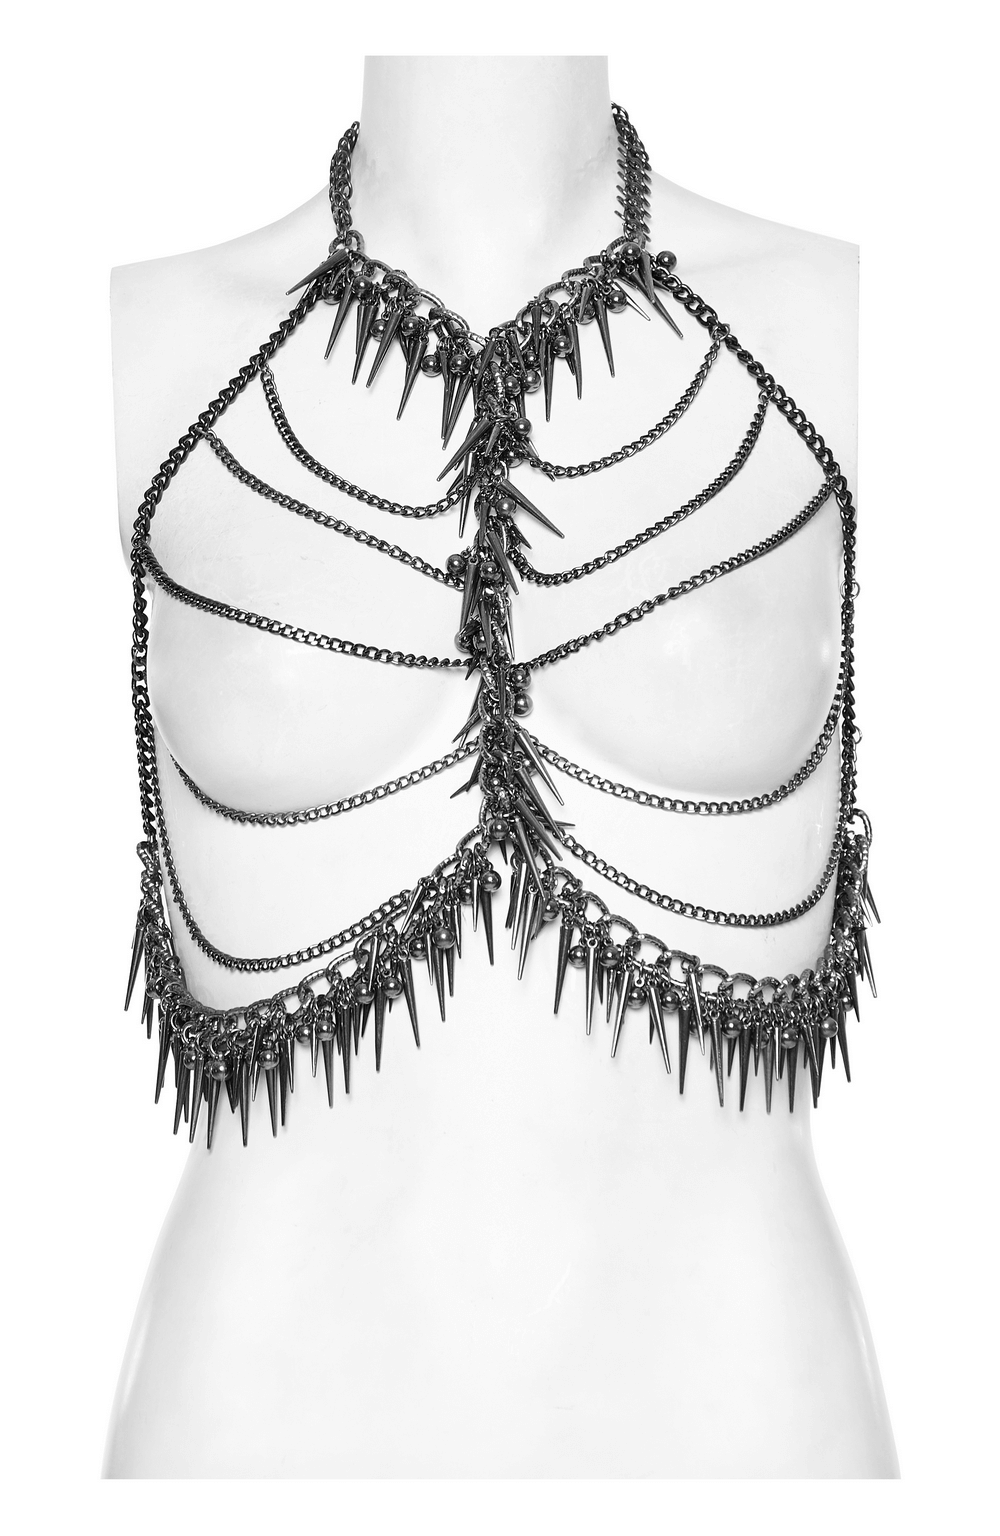 Edgy Metal Chain Harness with Rivet Detailing